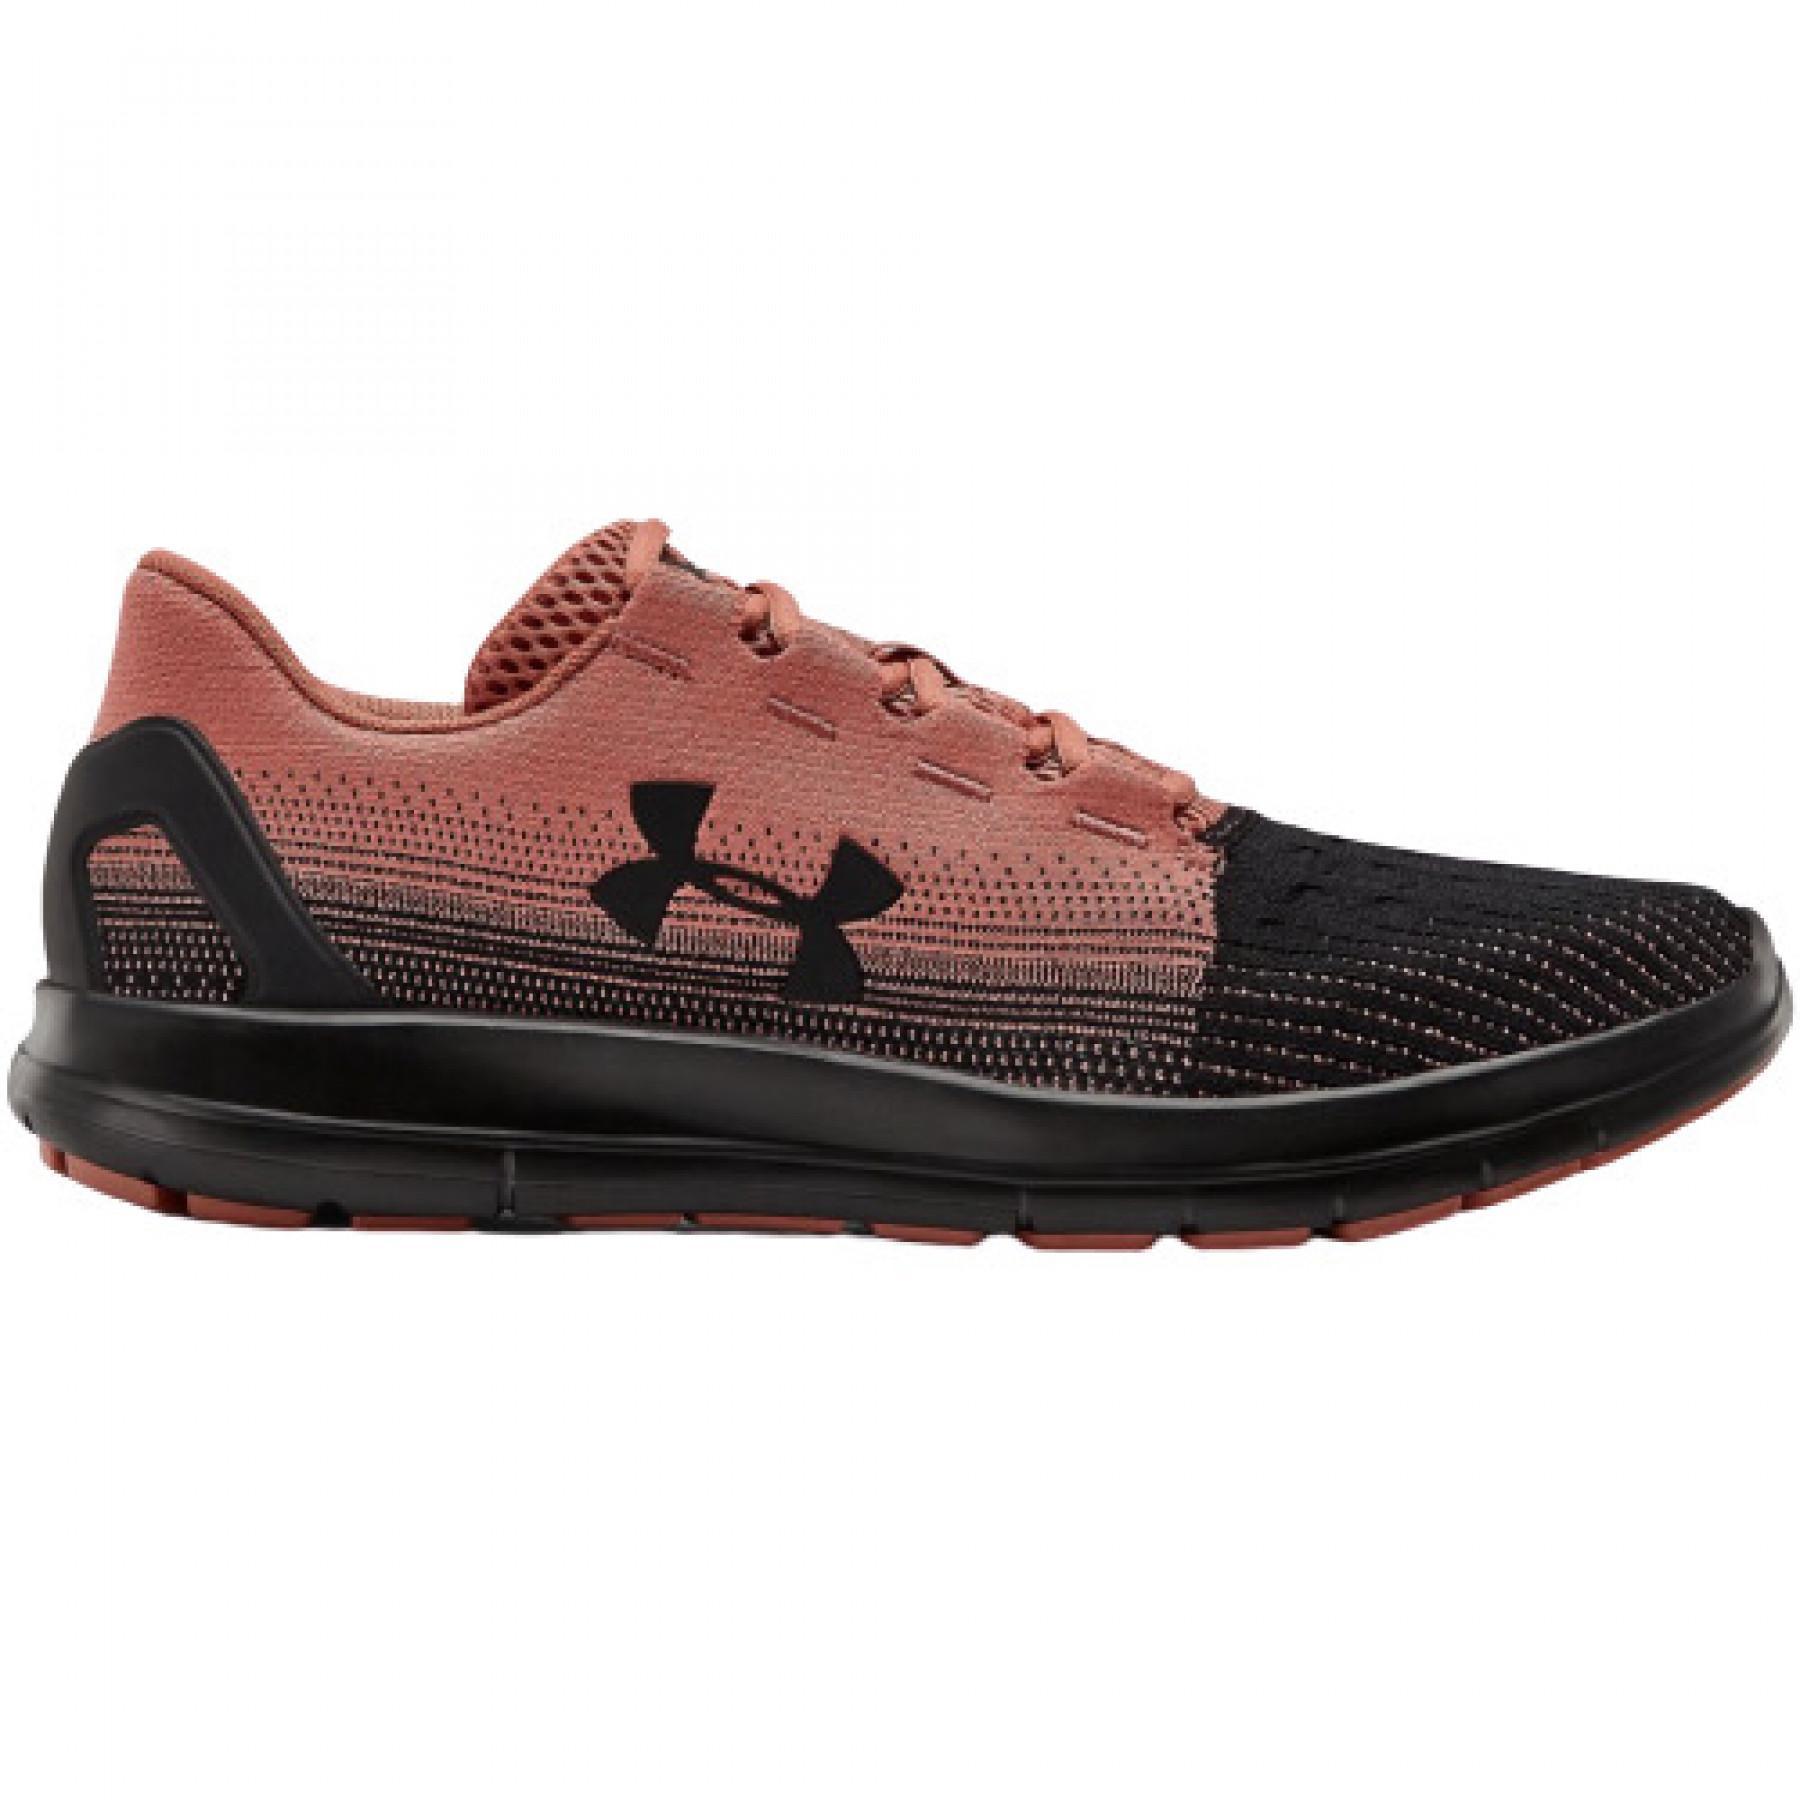 Formadores Under Armour Remix 2.0